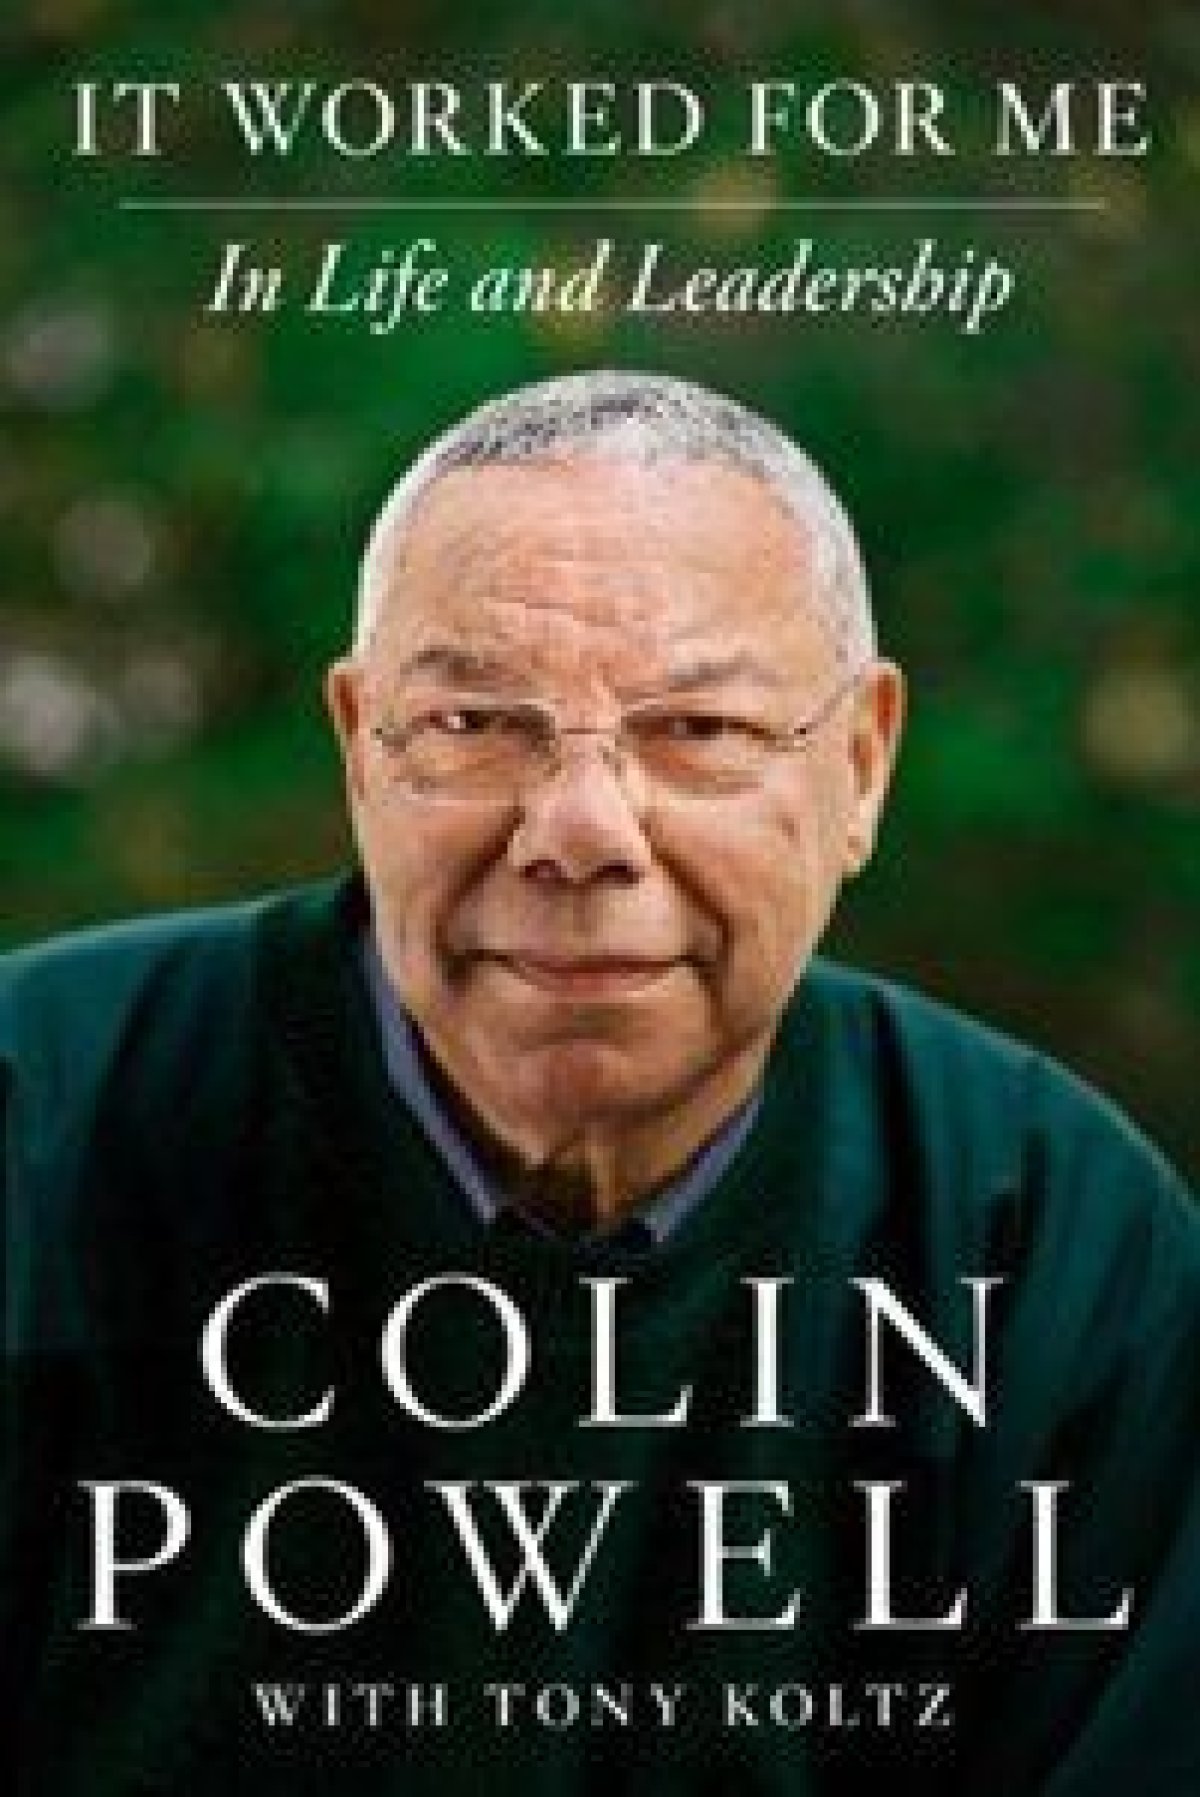 colin-powell-wroked-for me-book-cover